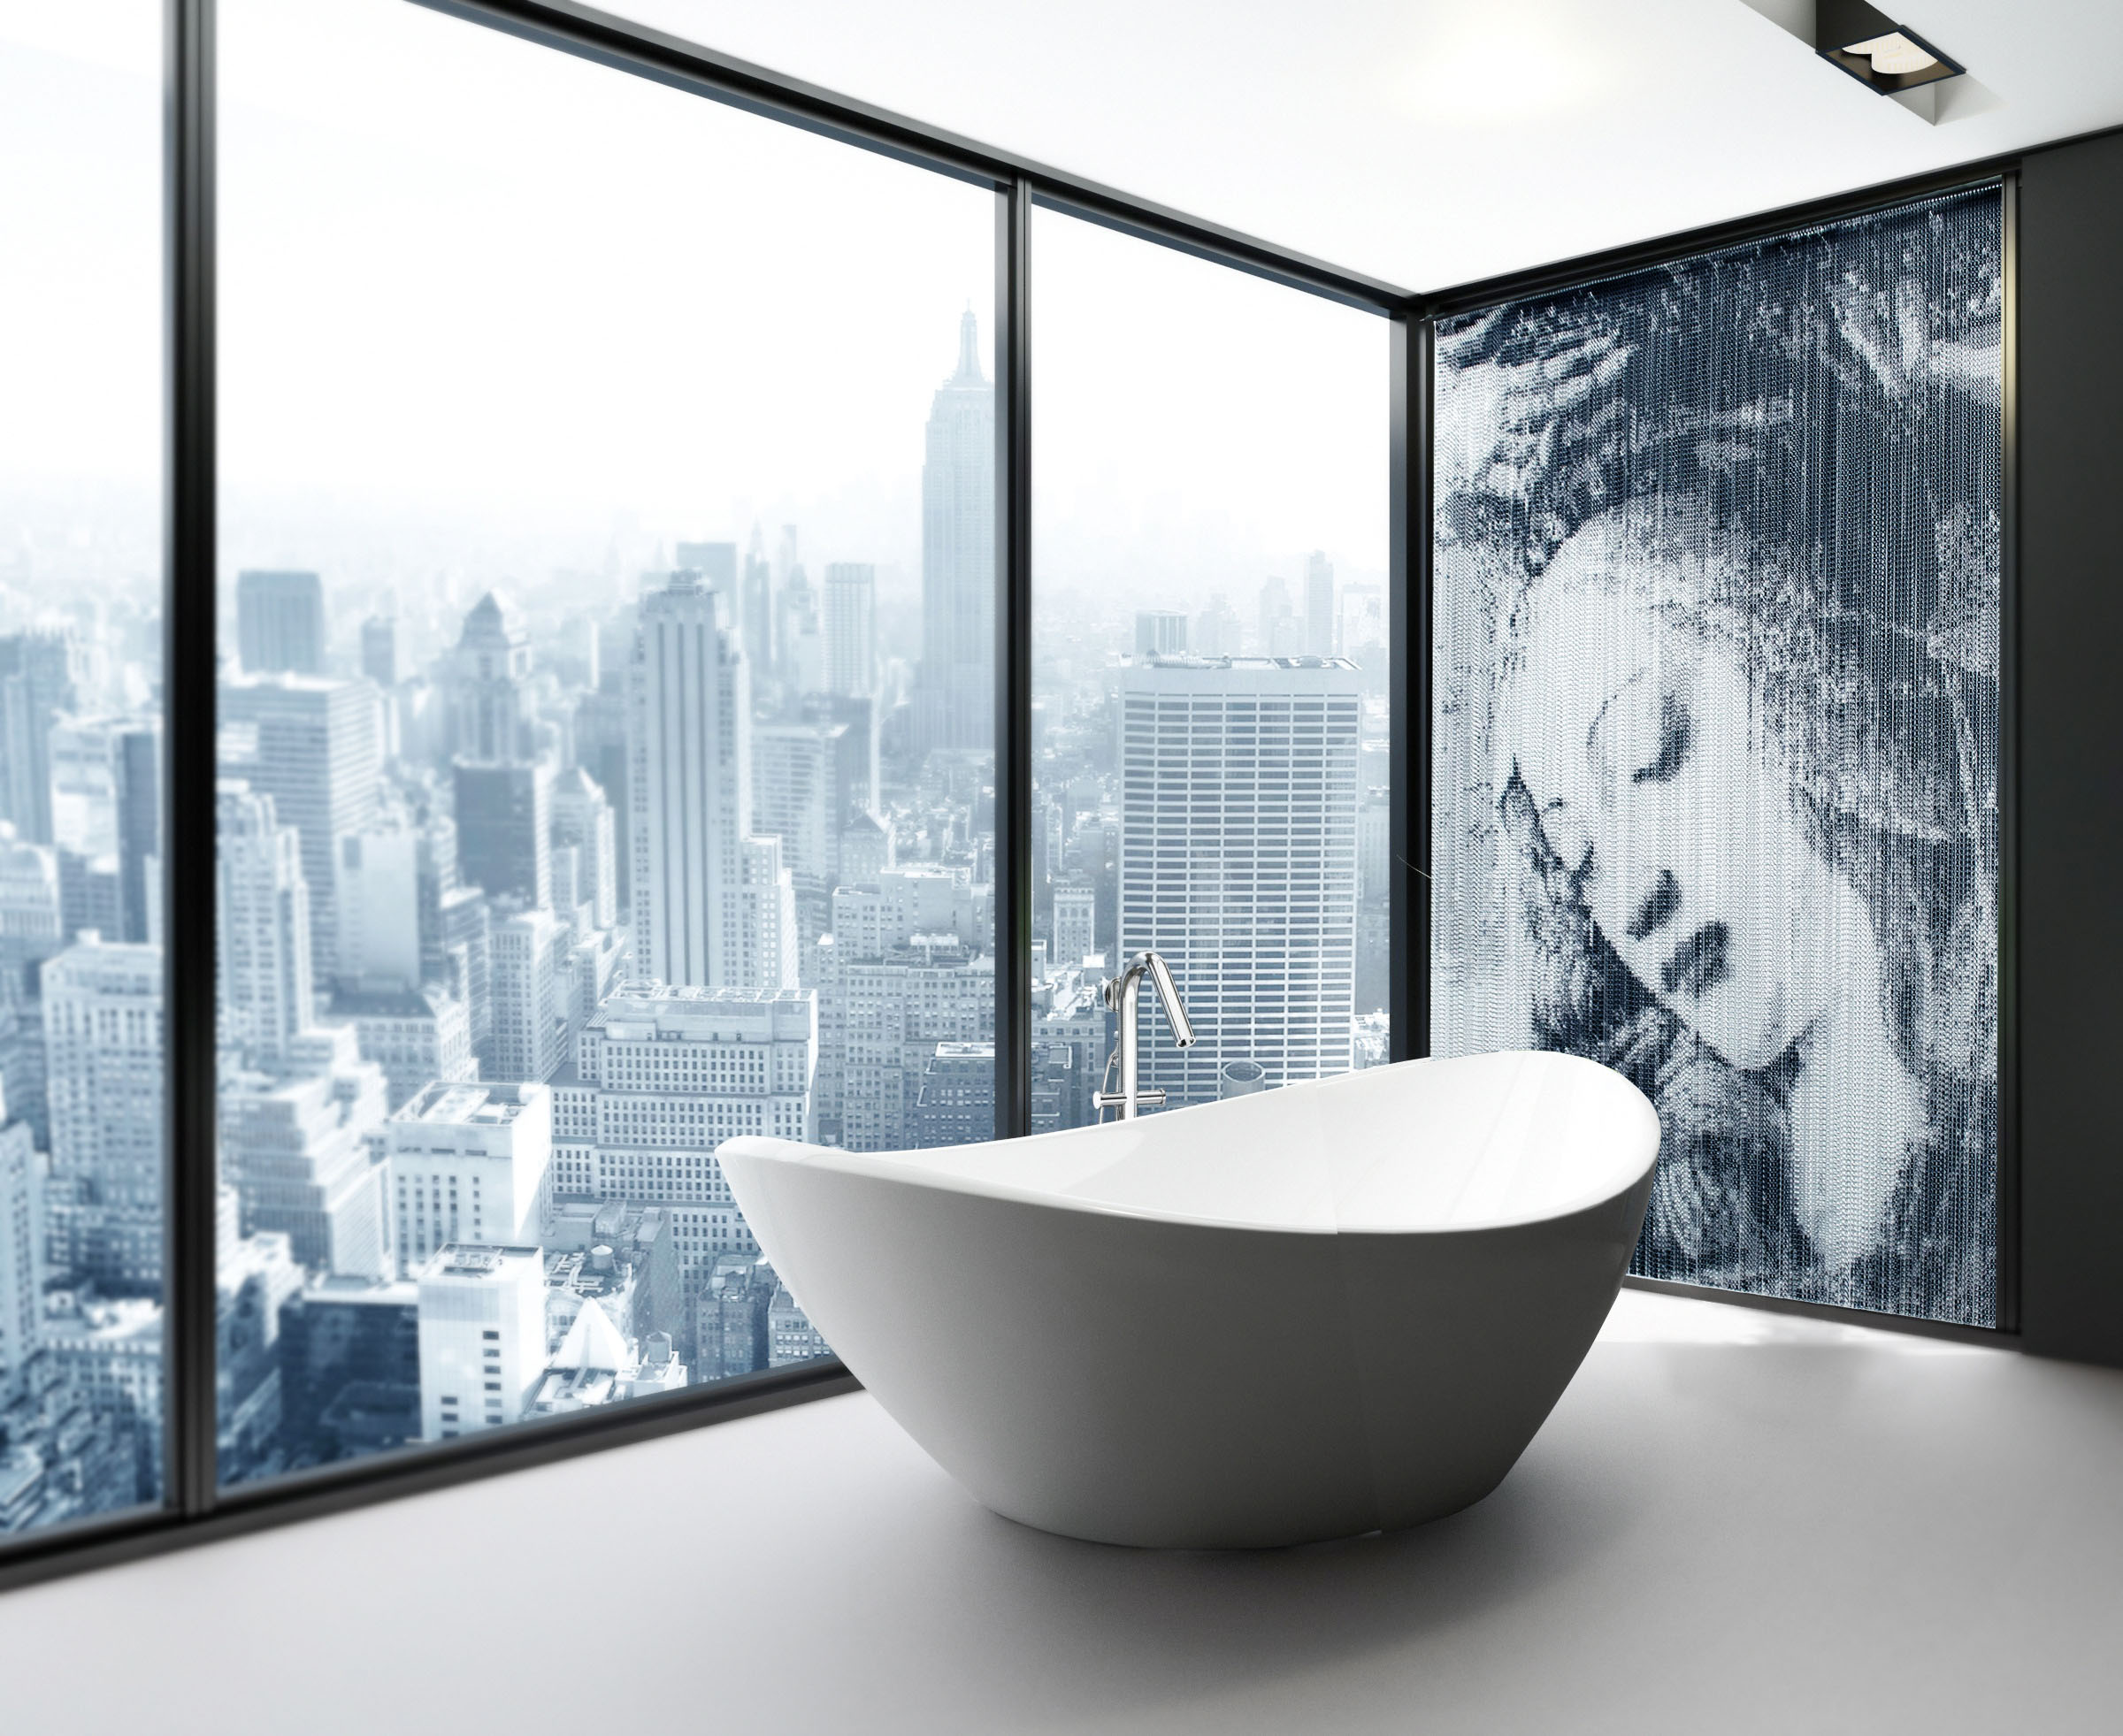 Exclusive Luxury Bathroom Interior in a Penthouse